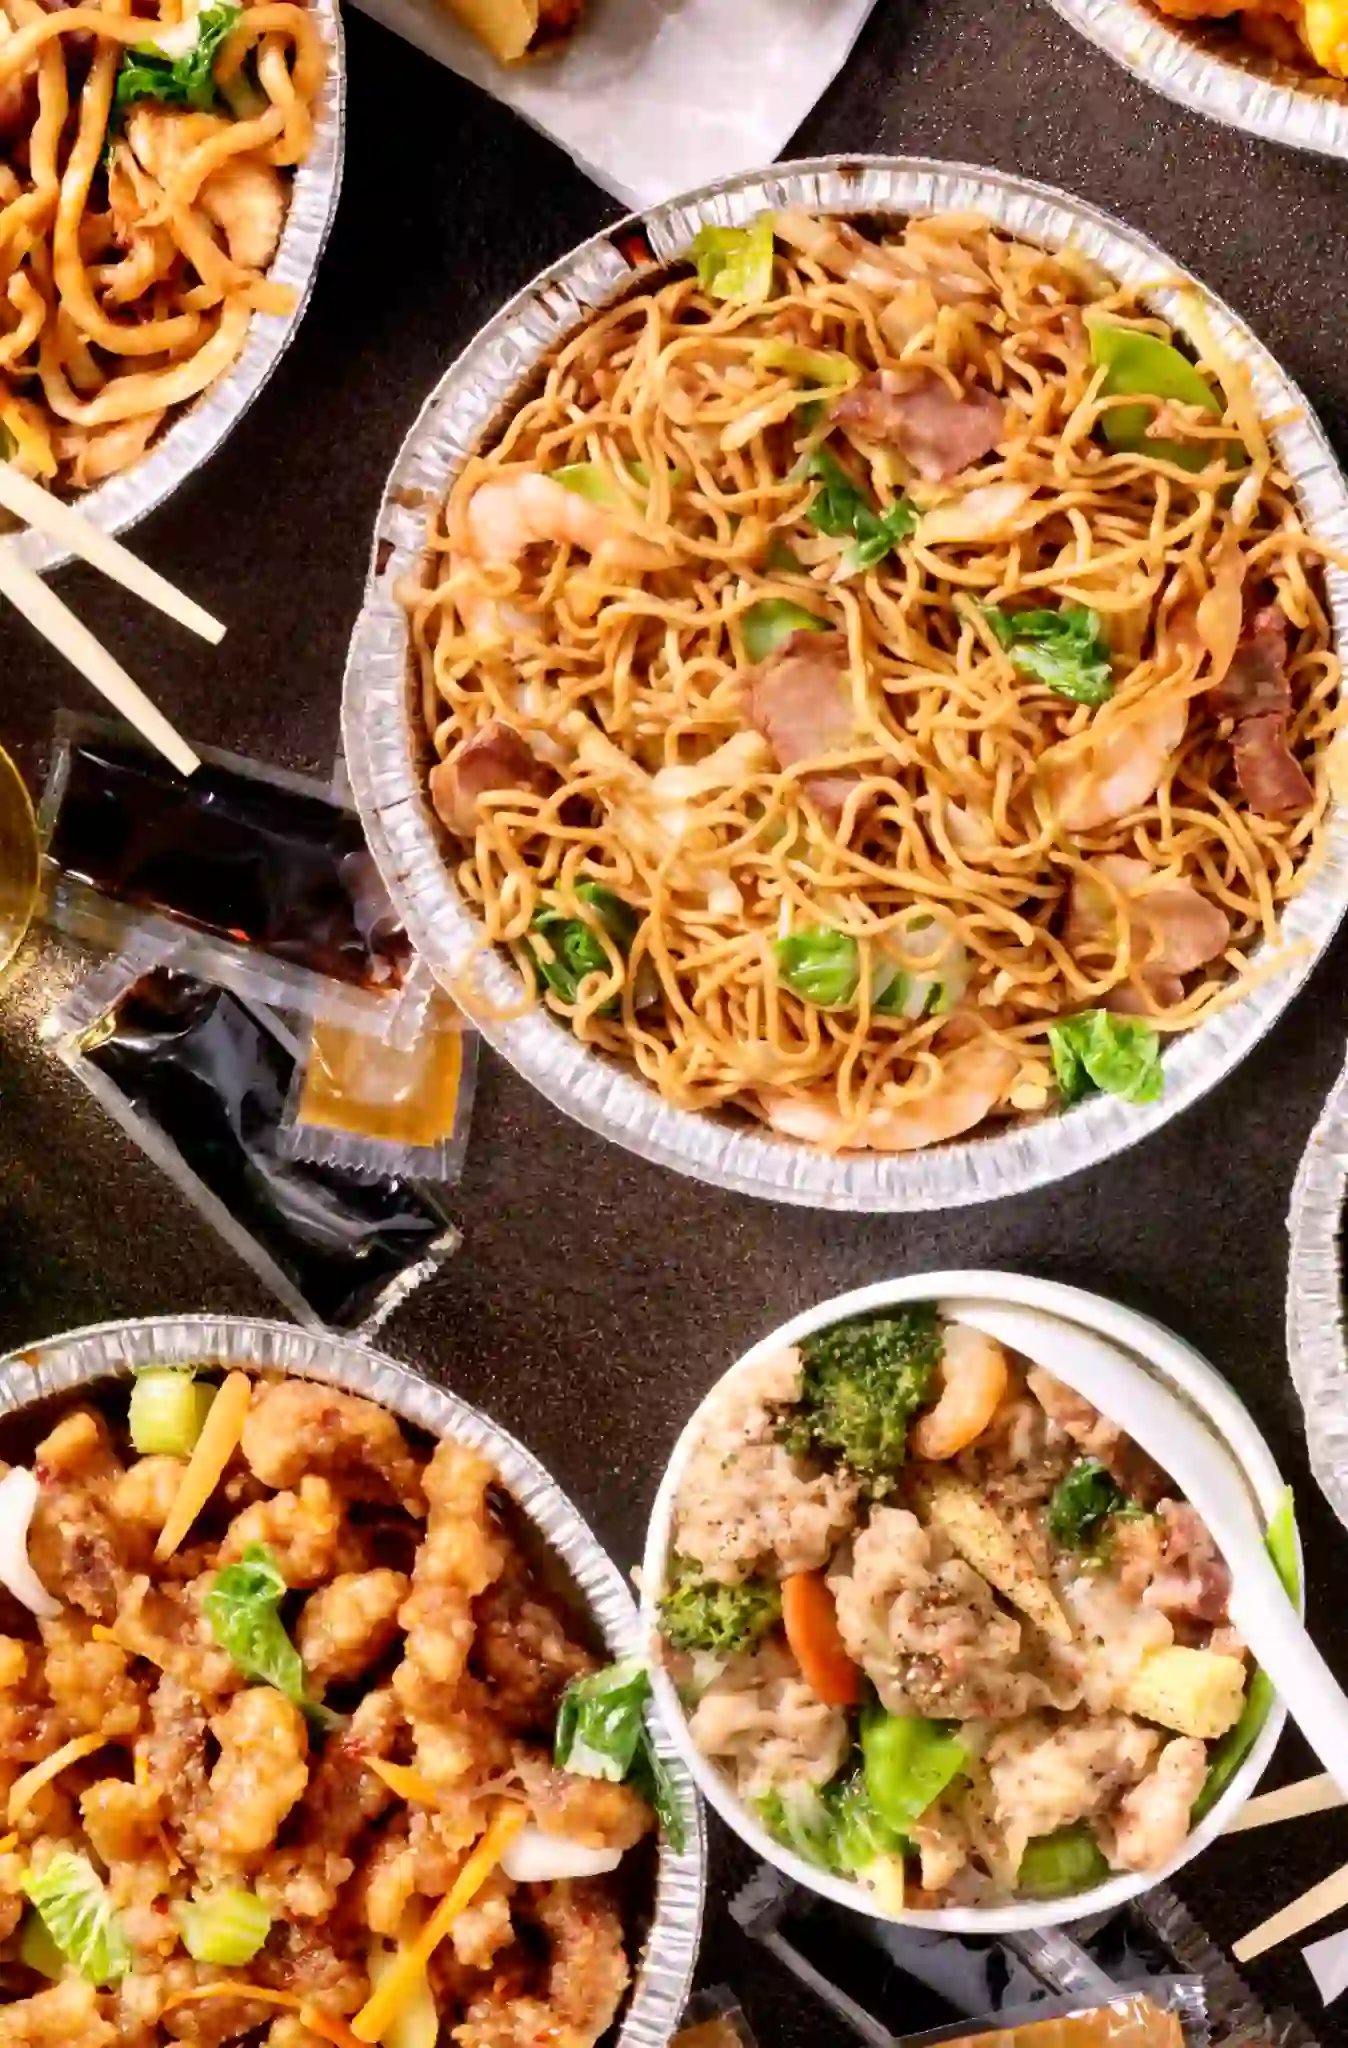 Plates with noodles and sauces